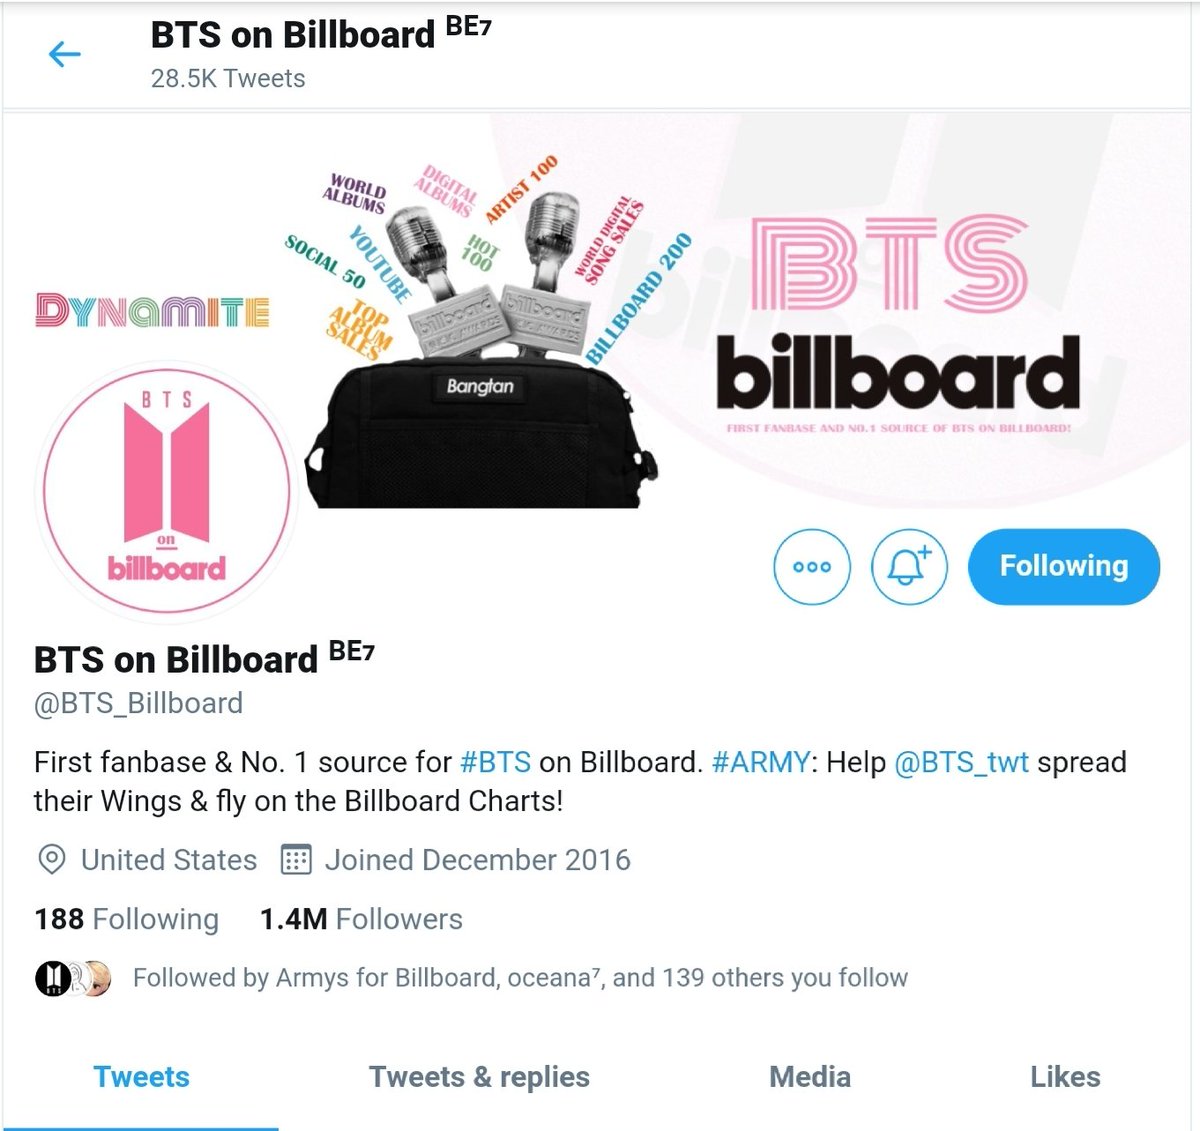 We have ARMY song created by ARMY every year on our anniversary -  @dailyhoping Want to create original music or art with ARMY? -  @YWA_twt Can't keep track of Merch before they get sold out? -  @BTSMerchUpdates BTS' performance on Billboard? -  @BTS_Billboard  #BTSARMY  @BTS_twt